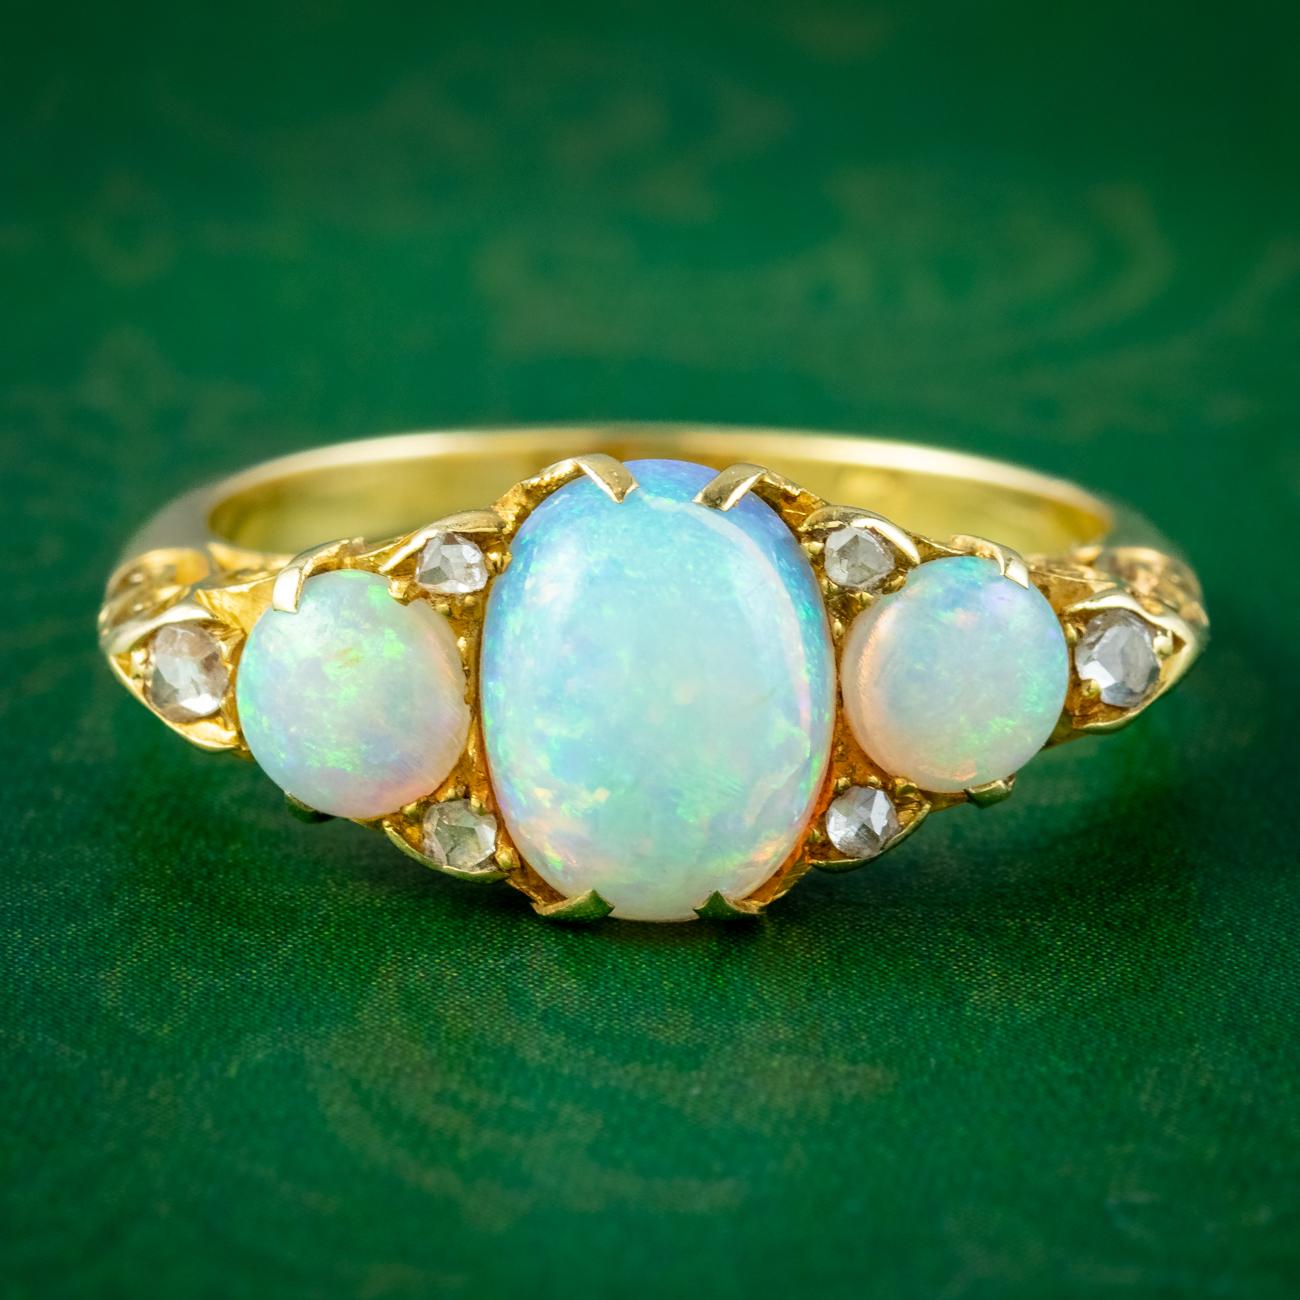 A glorious antique Edwardian carved half hoop ring adorned with a trilogy of natural opal cabochons displaying a kaleidoscope of vibrant colours that dance across the surface. They weigh approx. 1.7ct in the centre and 0.40ct on either side with six